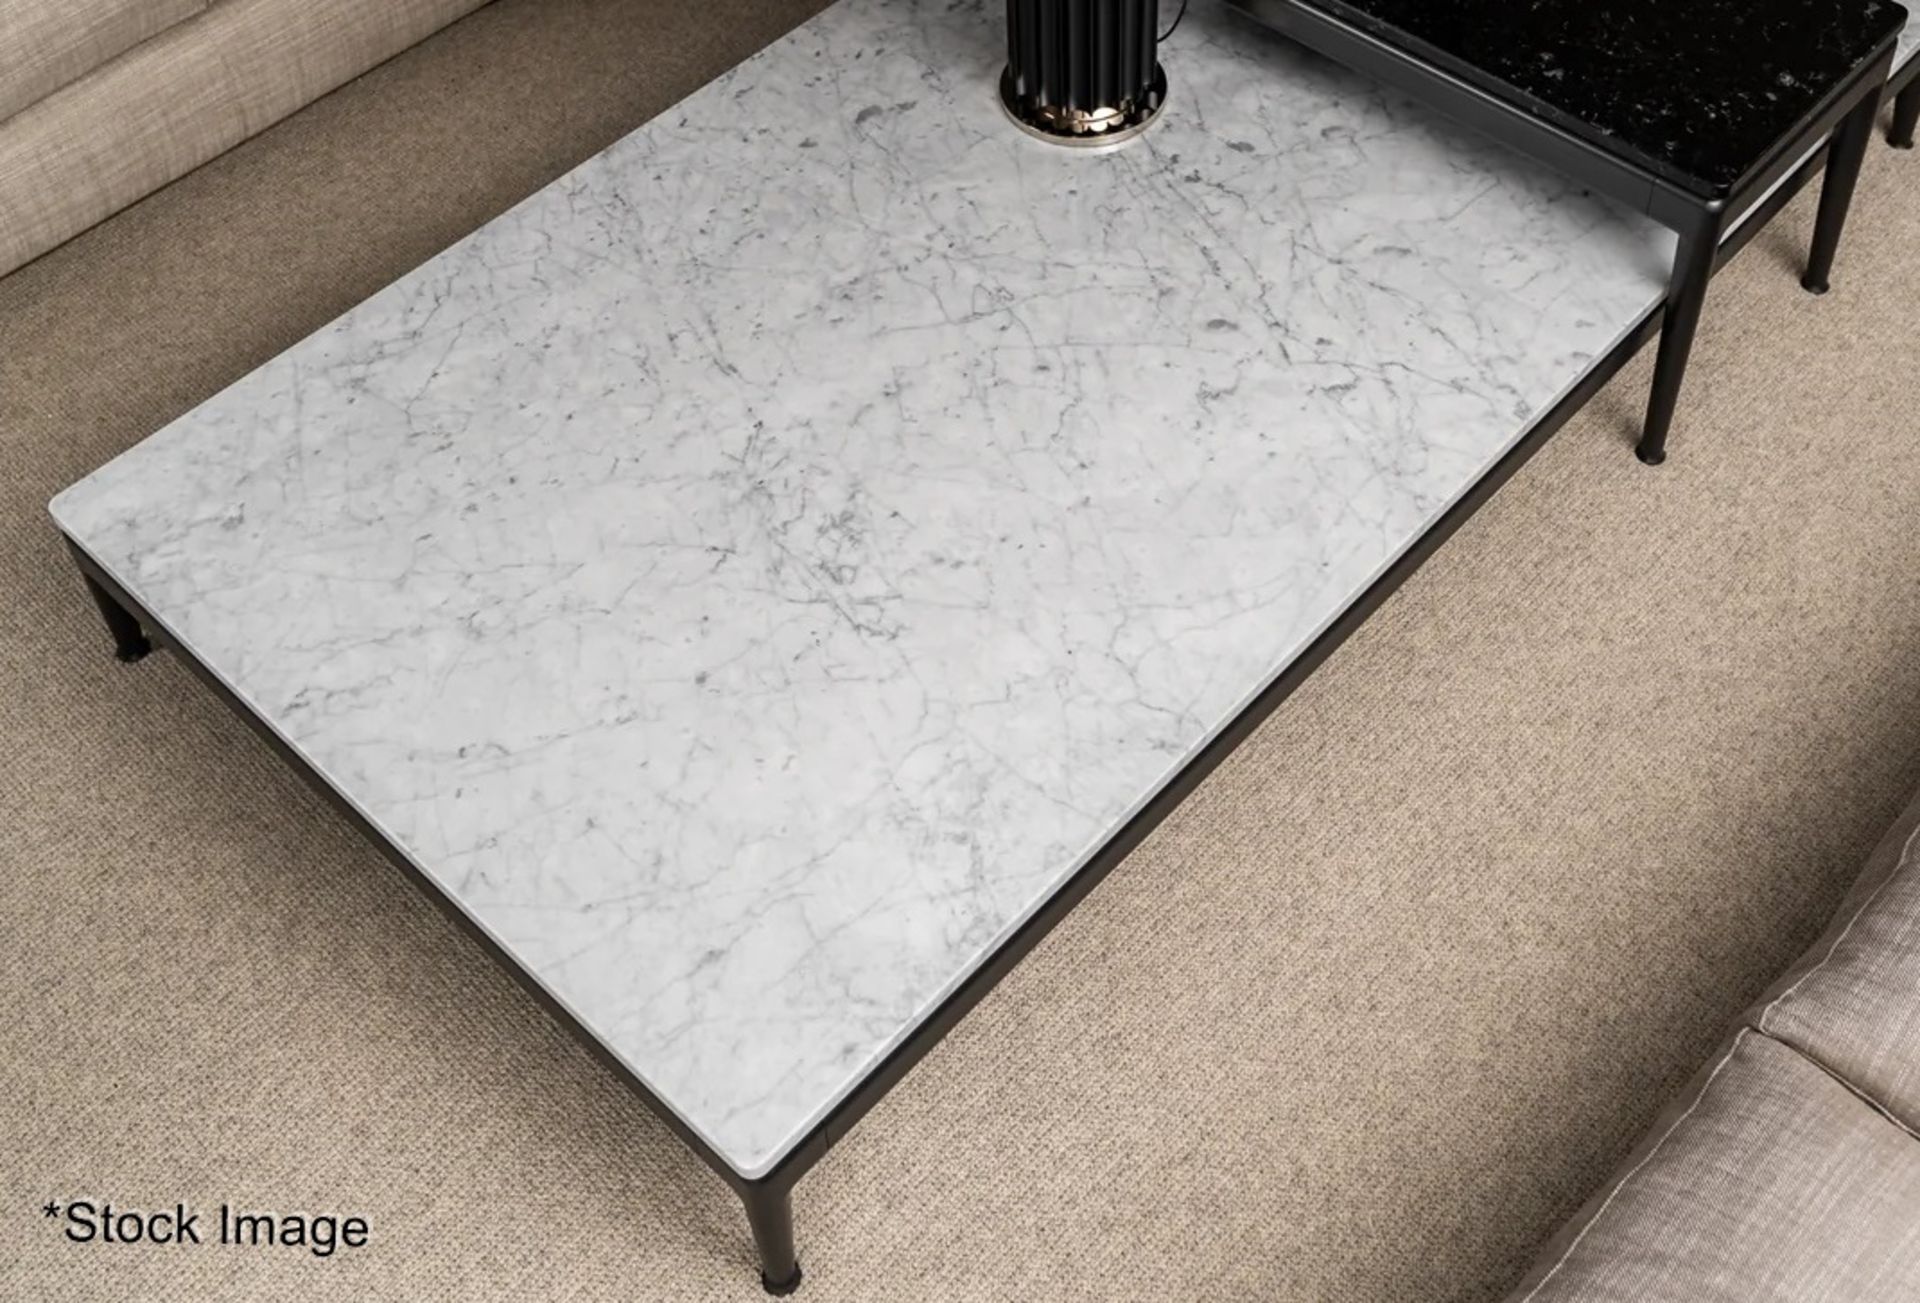 1 x FLEXFORM Pico Low Rising Coffee Table With a Carrara Marble Top And Aluminum Cast Tapered Legs - Image 8 of 12